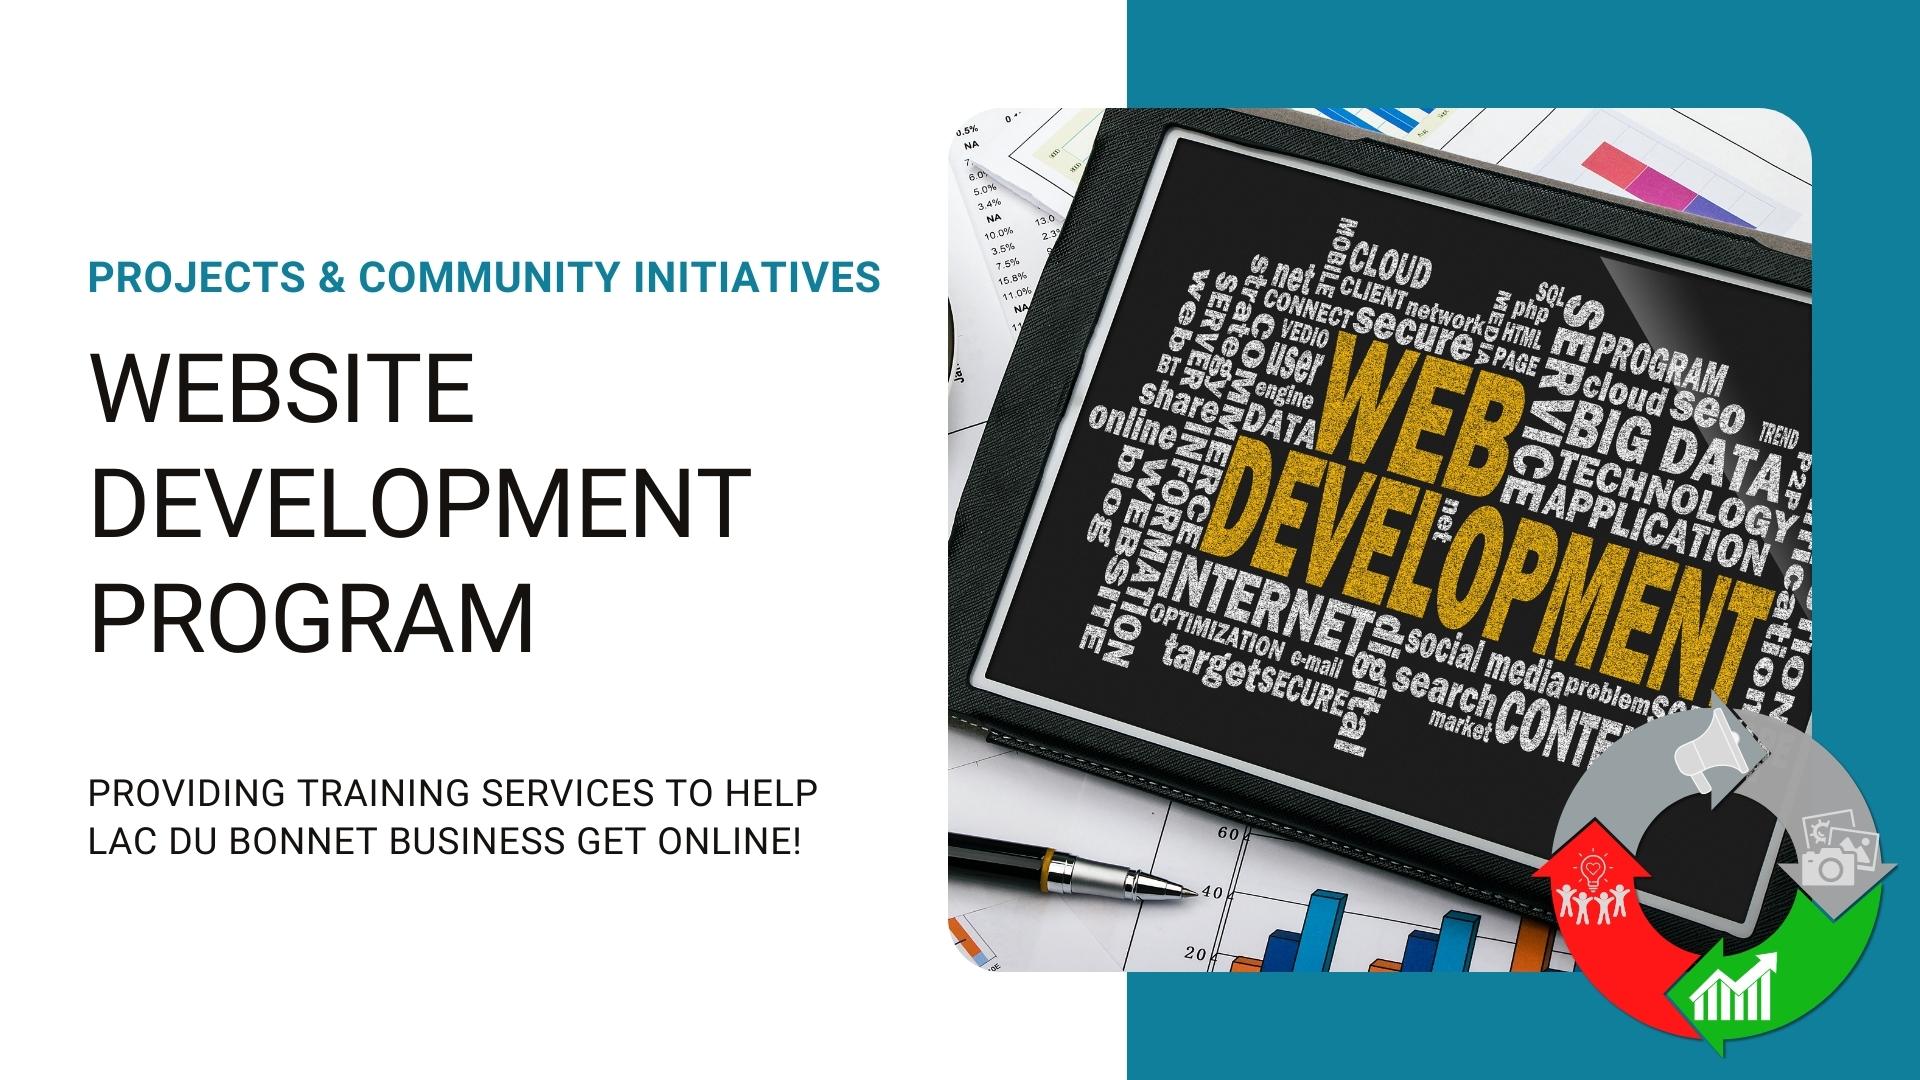 A graphic of the Website Development Program with an image of a tablet on top of papers.